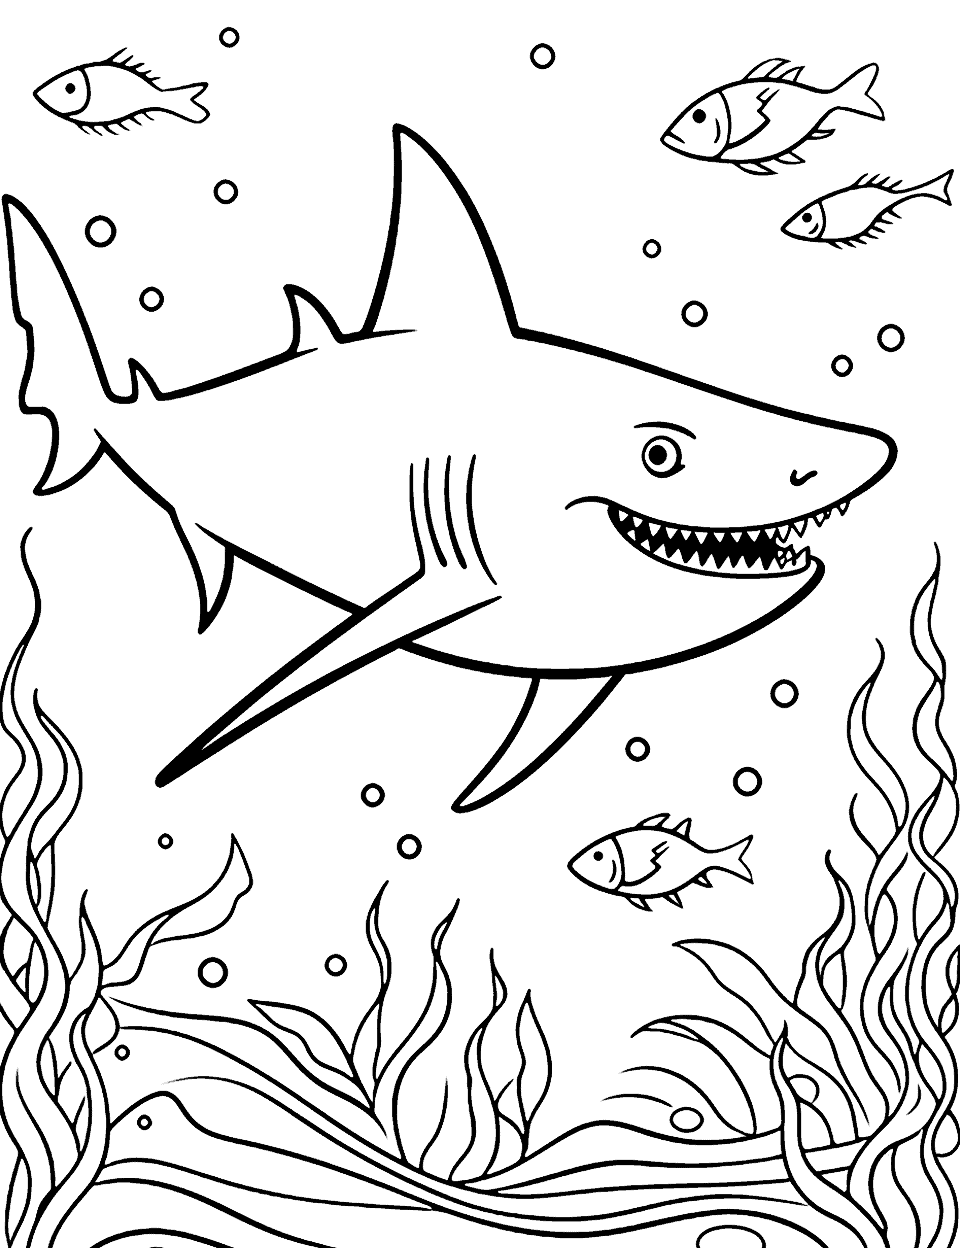 Reef Shark Night Swim Coloring Page - A nocturnal reef shark swimming through the ocean at night.